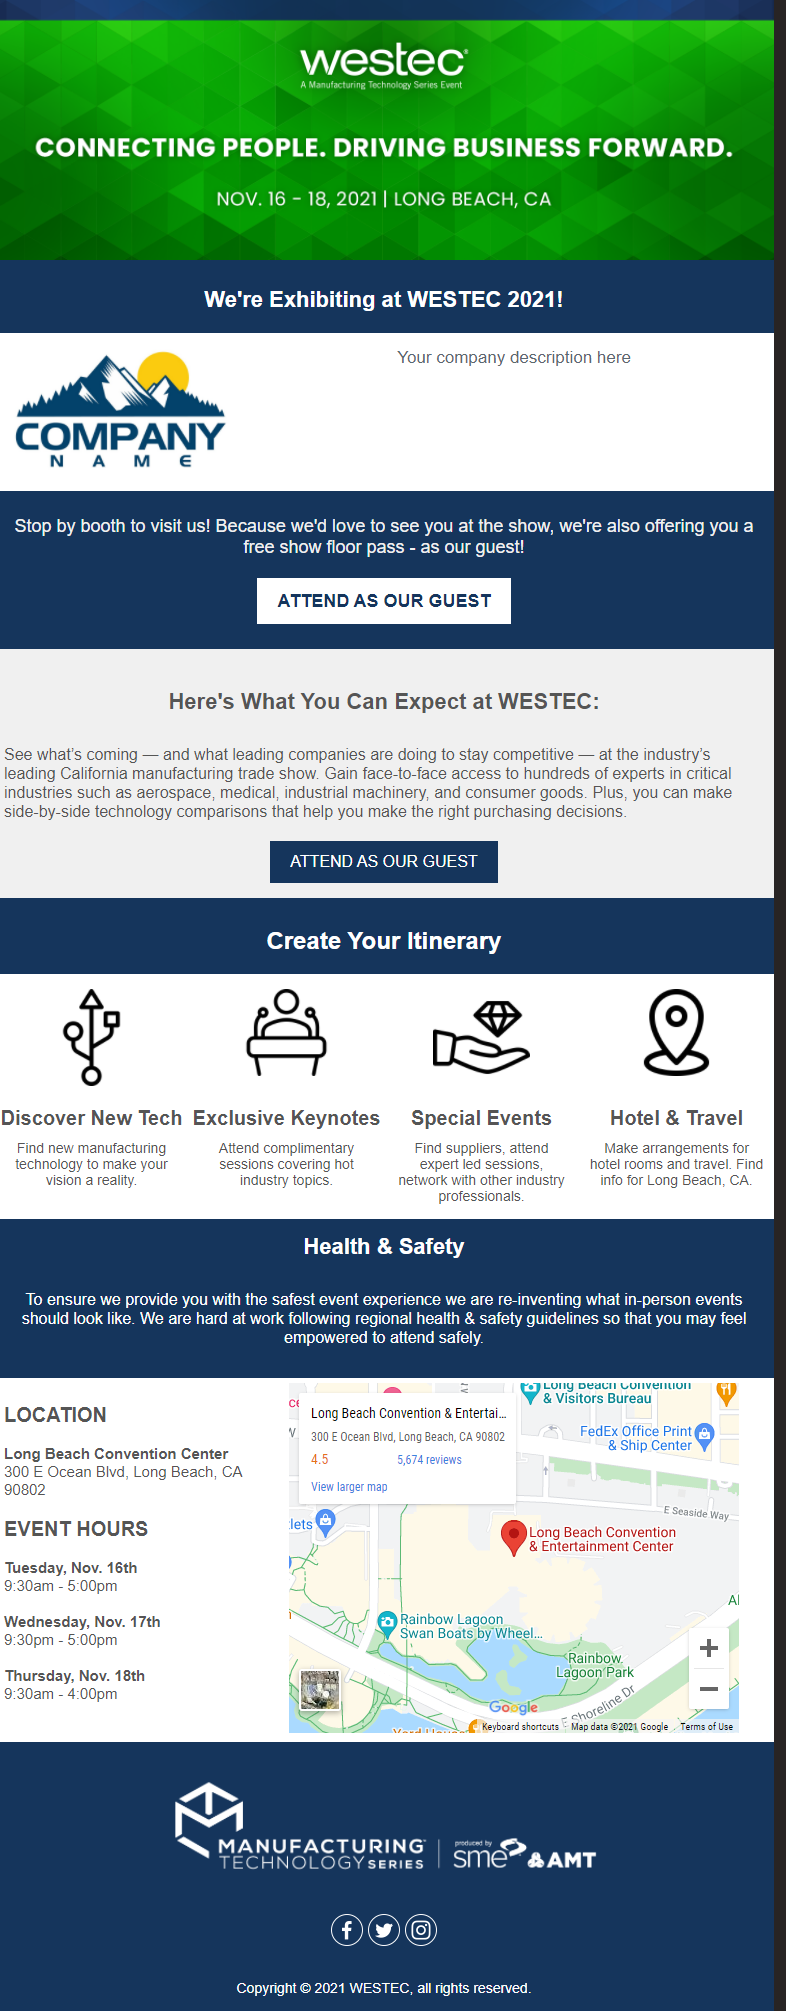 screencapture-campaigns-westeconline-WT21Your-Company-Name-b-2021-06-22-15_11_12.png